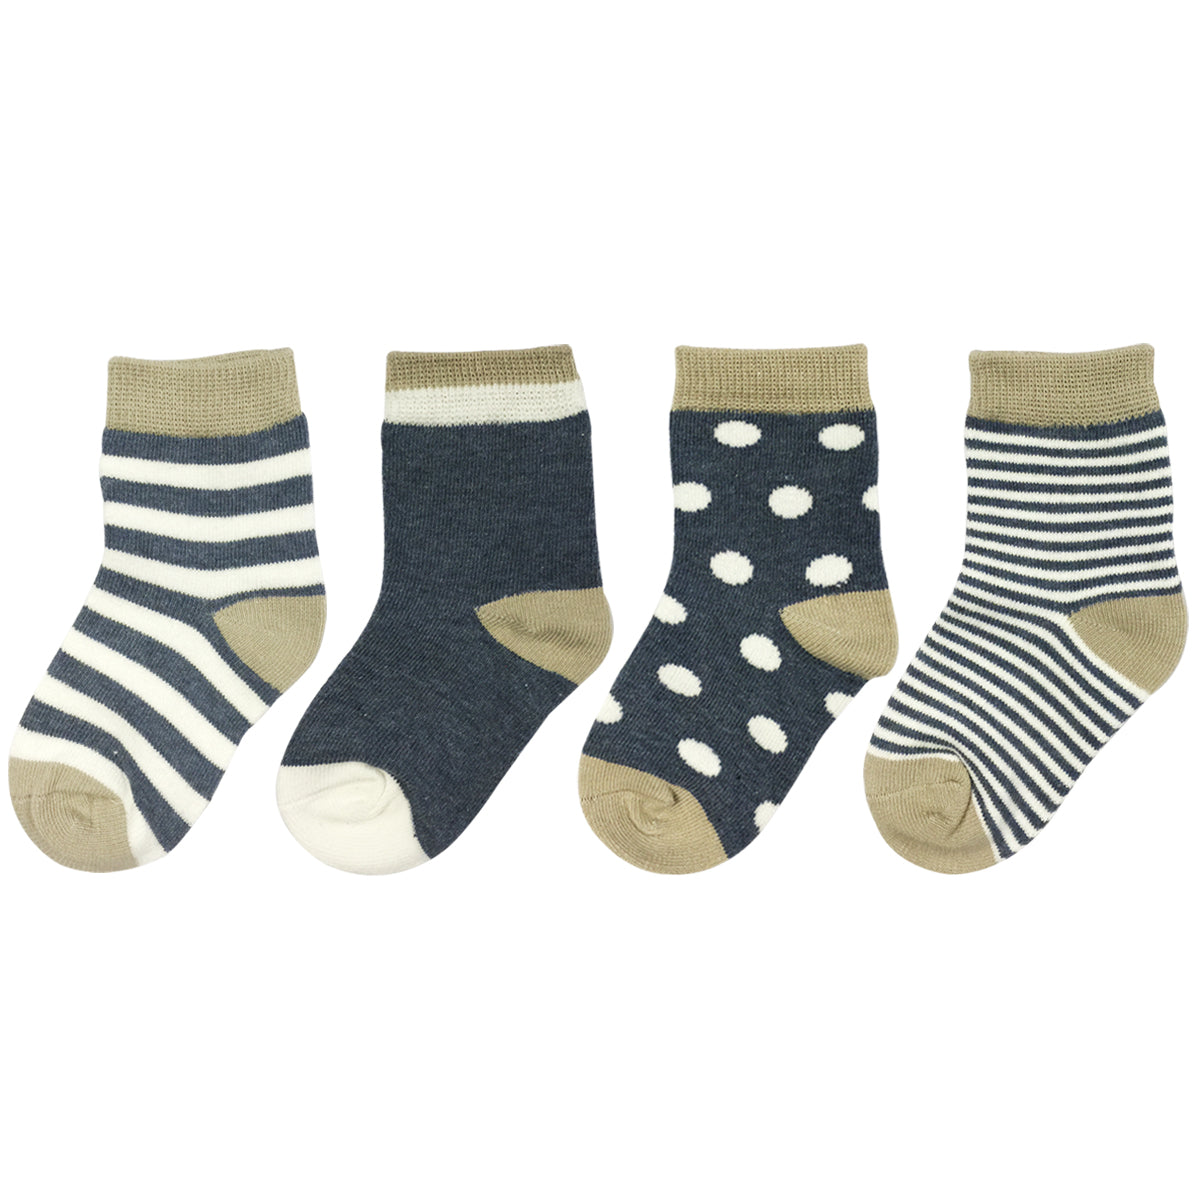 Wrapables Casual Cute Socks for Baby (Set of 4)